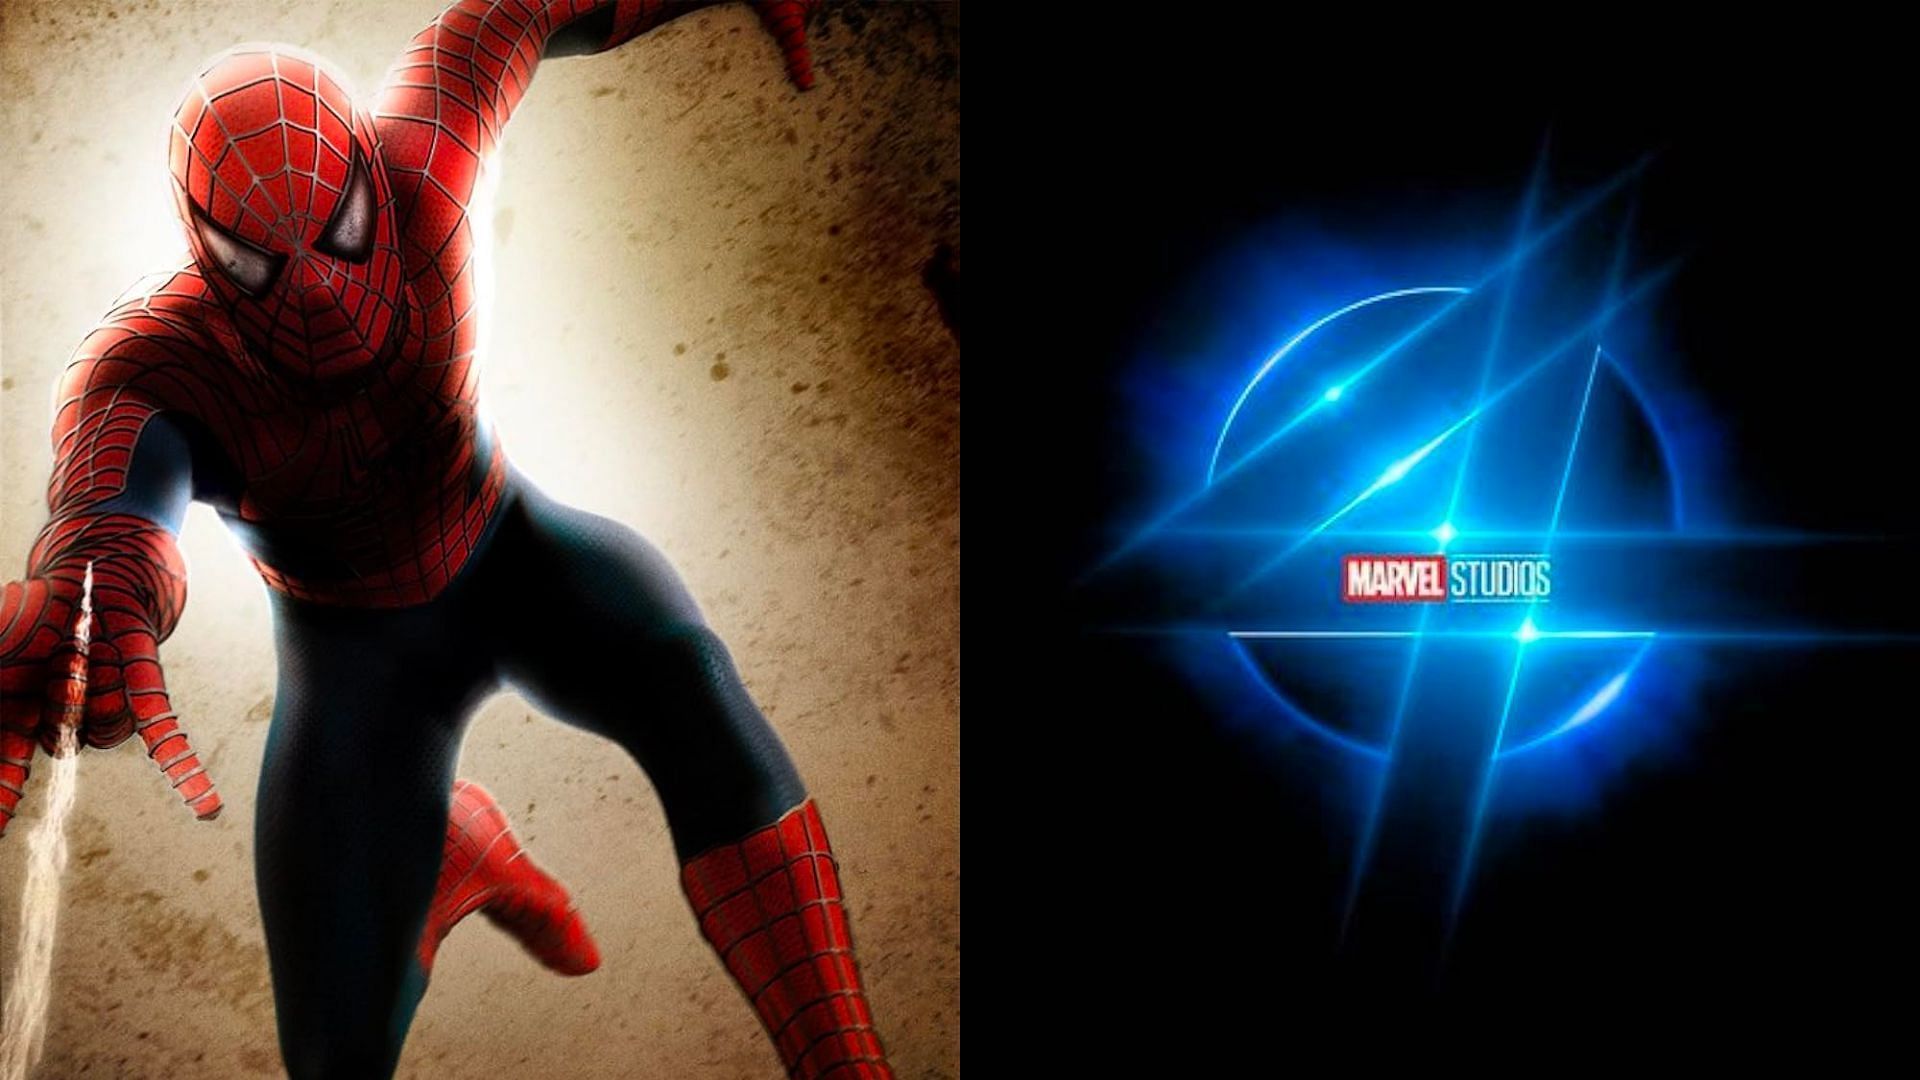 (L) Spider-Man 4 and (R) Fantastic 4 need to have good storylines (Images via IMDb)